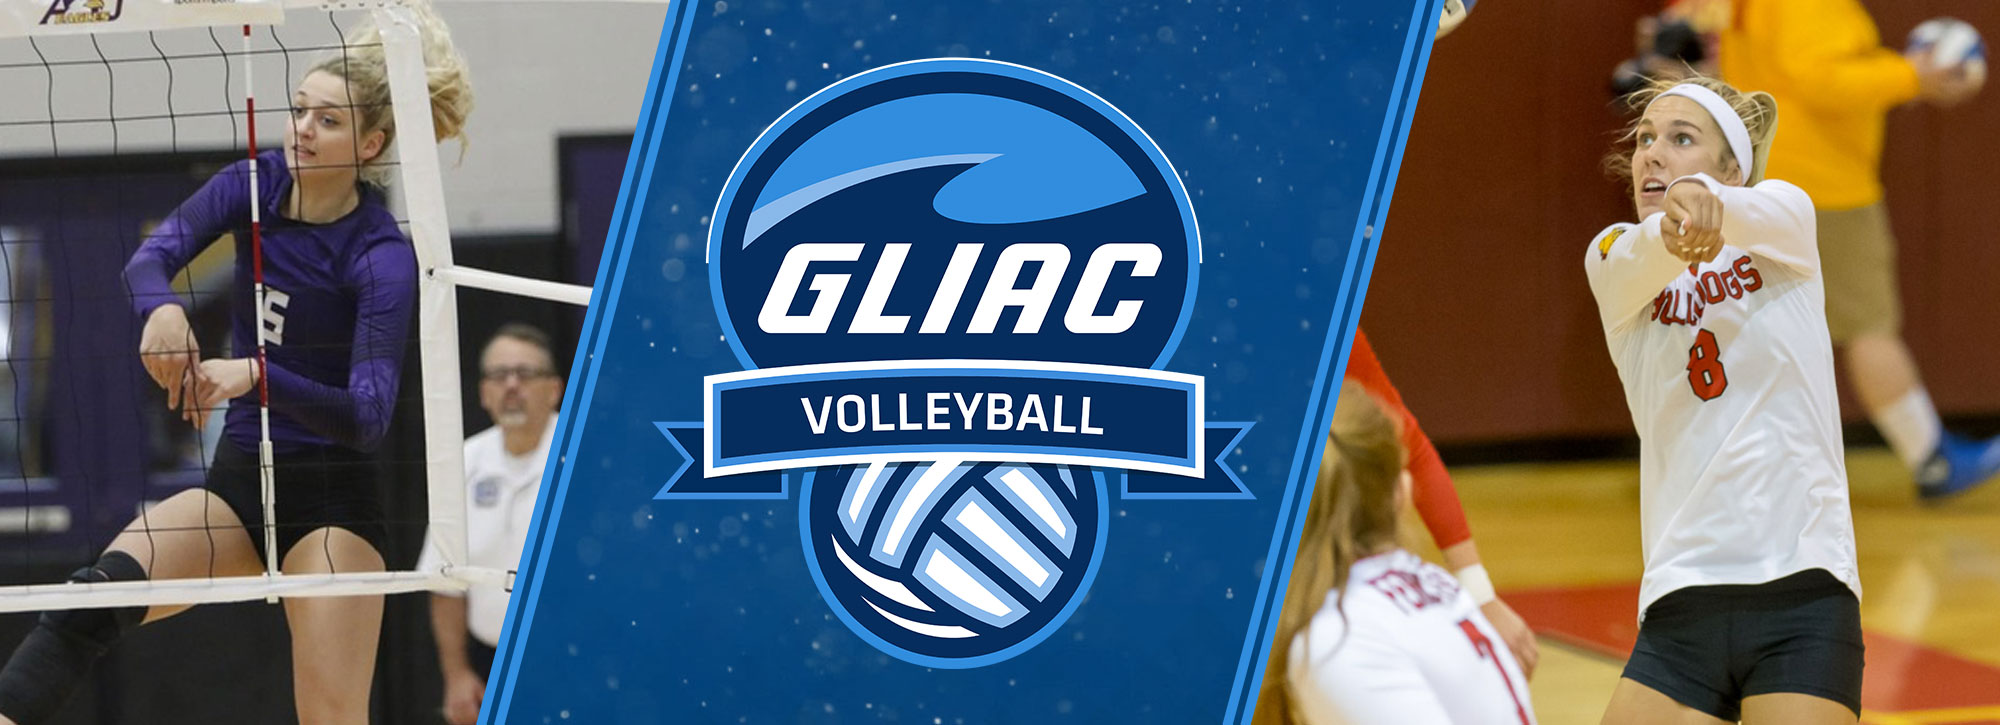 Ferris State's Brewer, Ashland's Woycik Selected GLIAC Volleyball Players of the Week